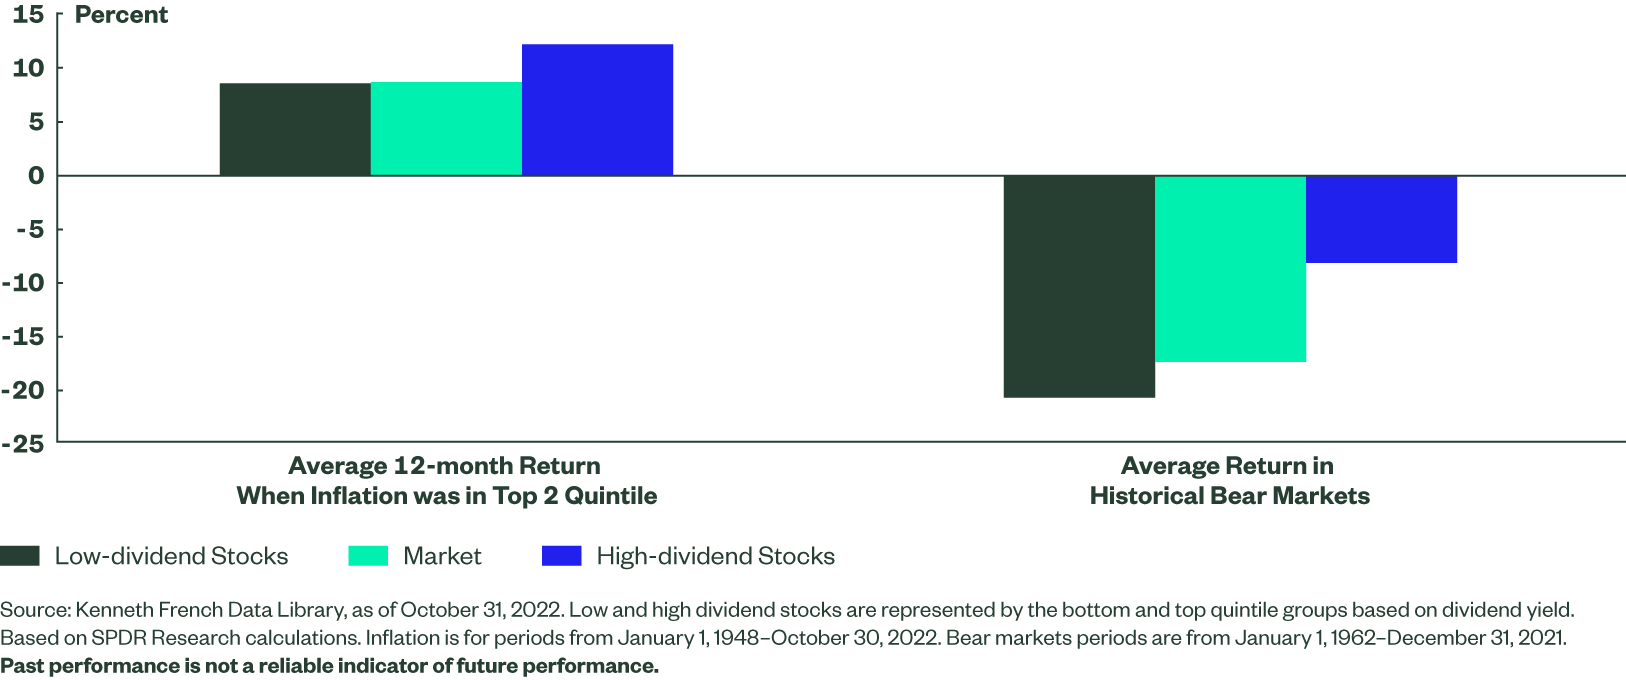 High-dividend Stocks’ Outperformance in a High-inflation Environment and During Bear Markets